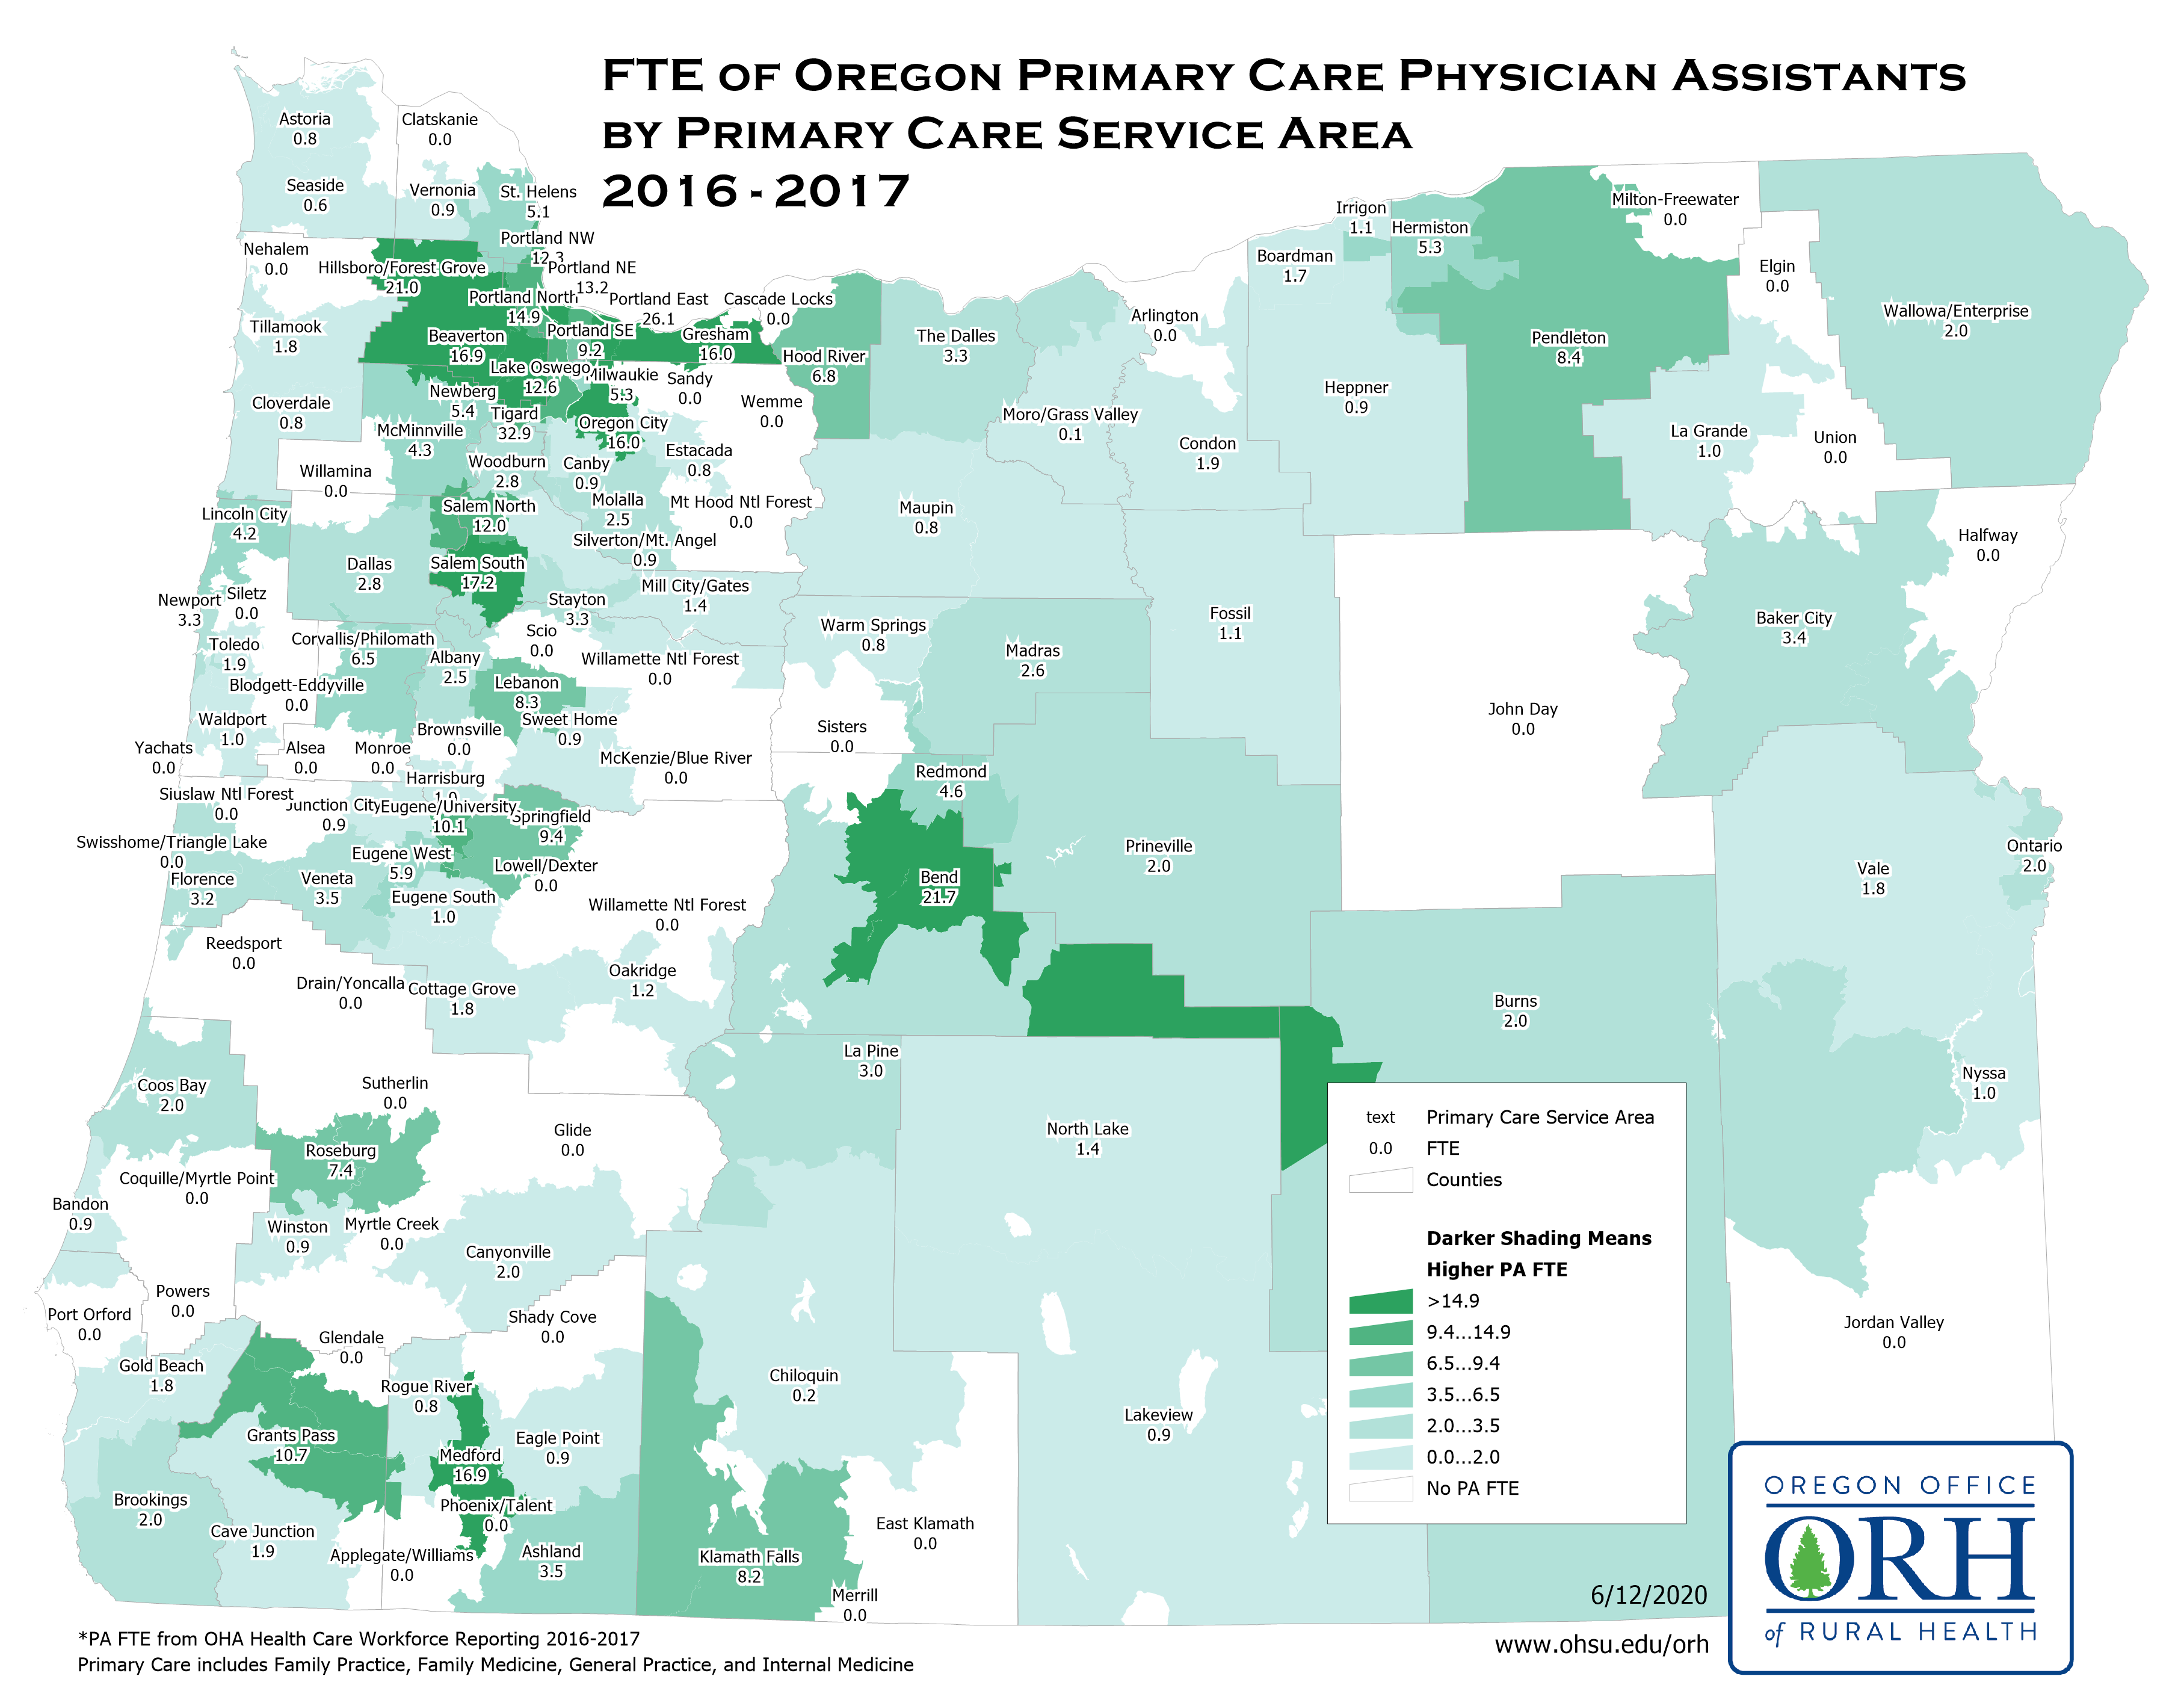 Physician Assistants by Service Area